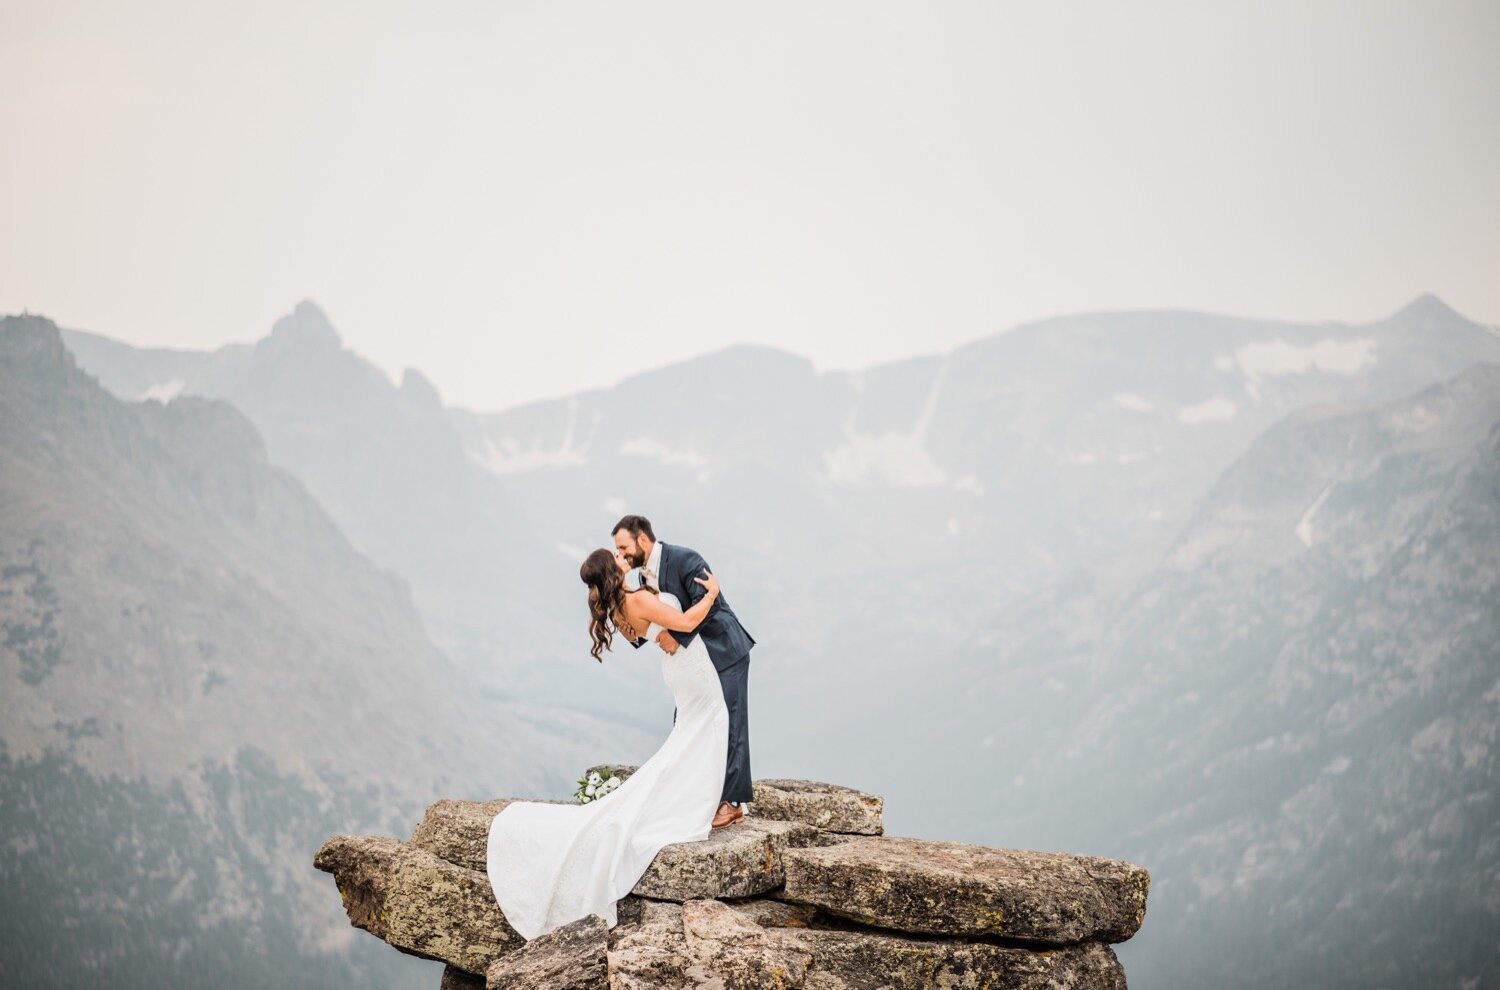  First look, Bride and groom, Summer wedding, Outdoor wedding, Wedding Inspiration, Wedding ideas, Wedding Planning, Colorado Cheley Camps, Cabin Wedding, Lodge Wedding, Mountain Wedding, Colorado Wedding Planner, Colorado Mountain Wedding, Estes Par